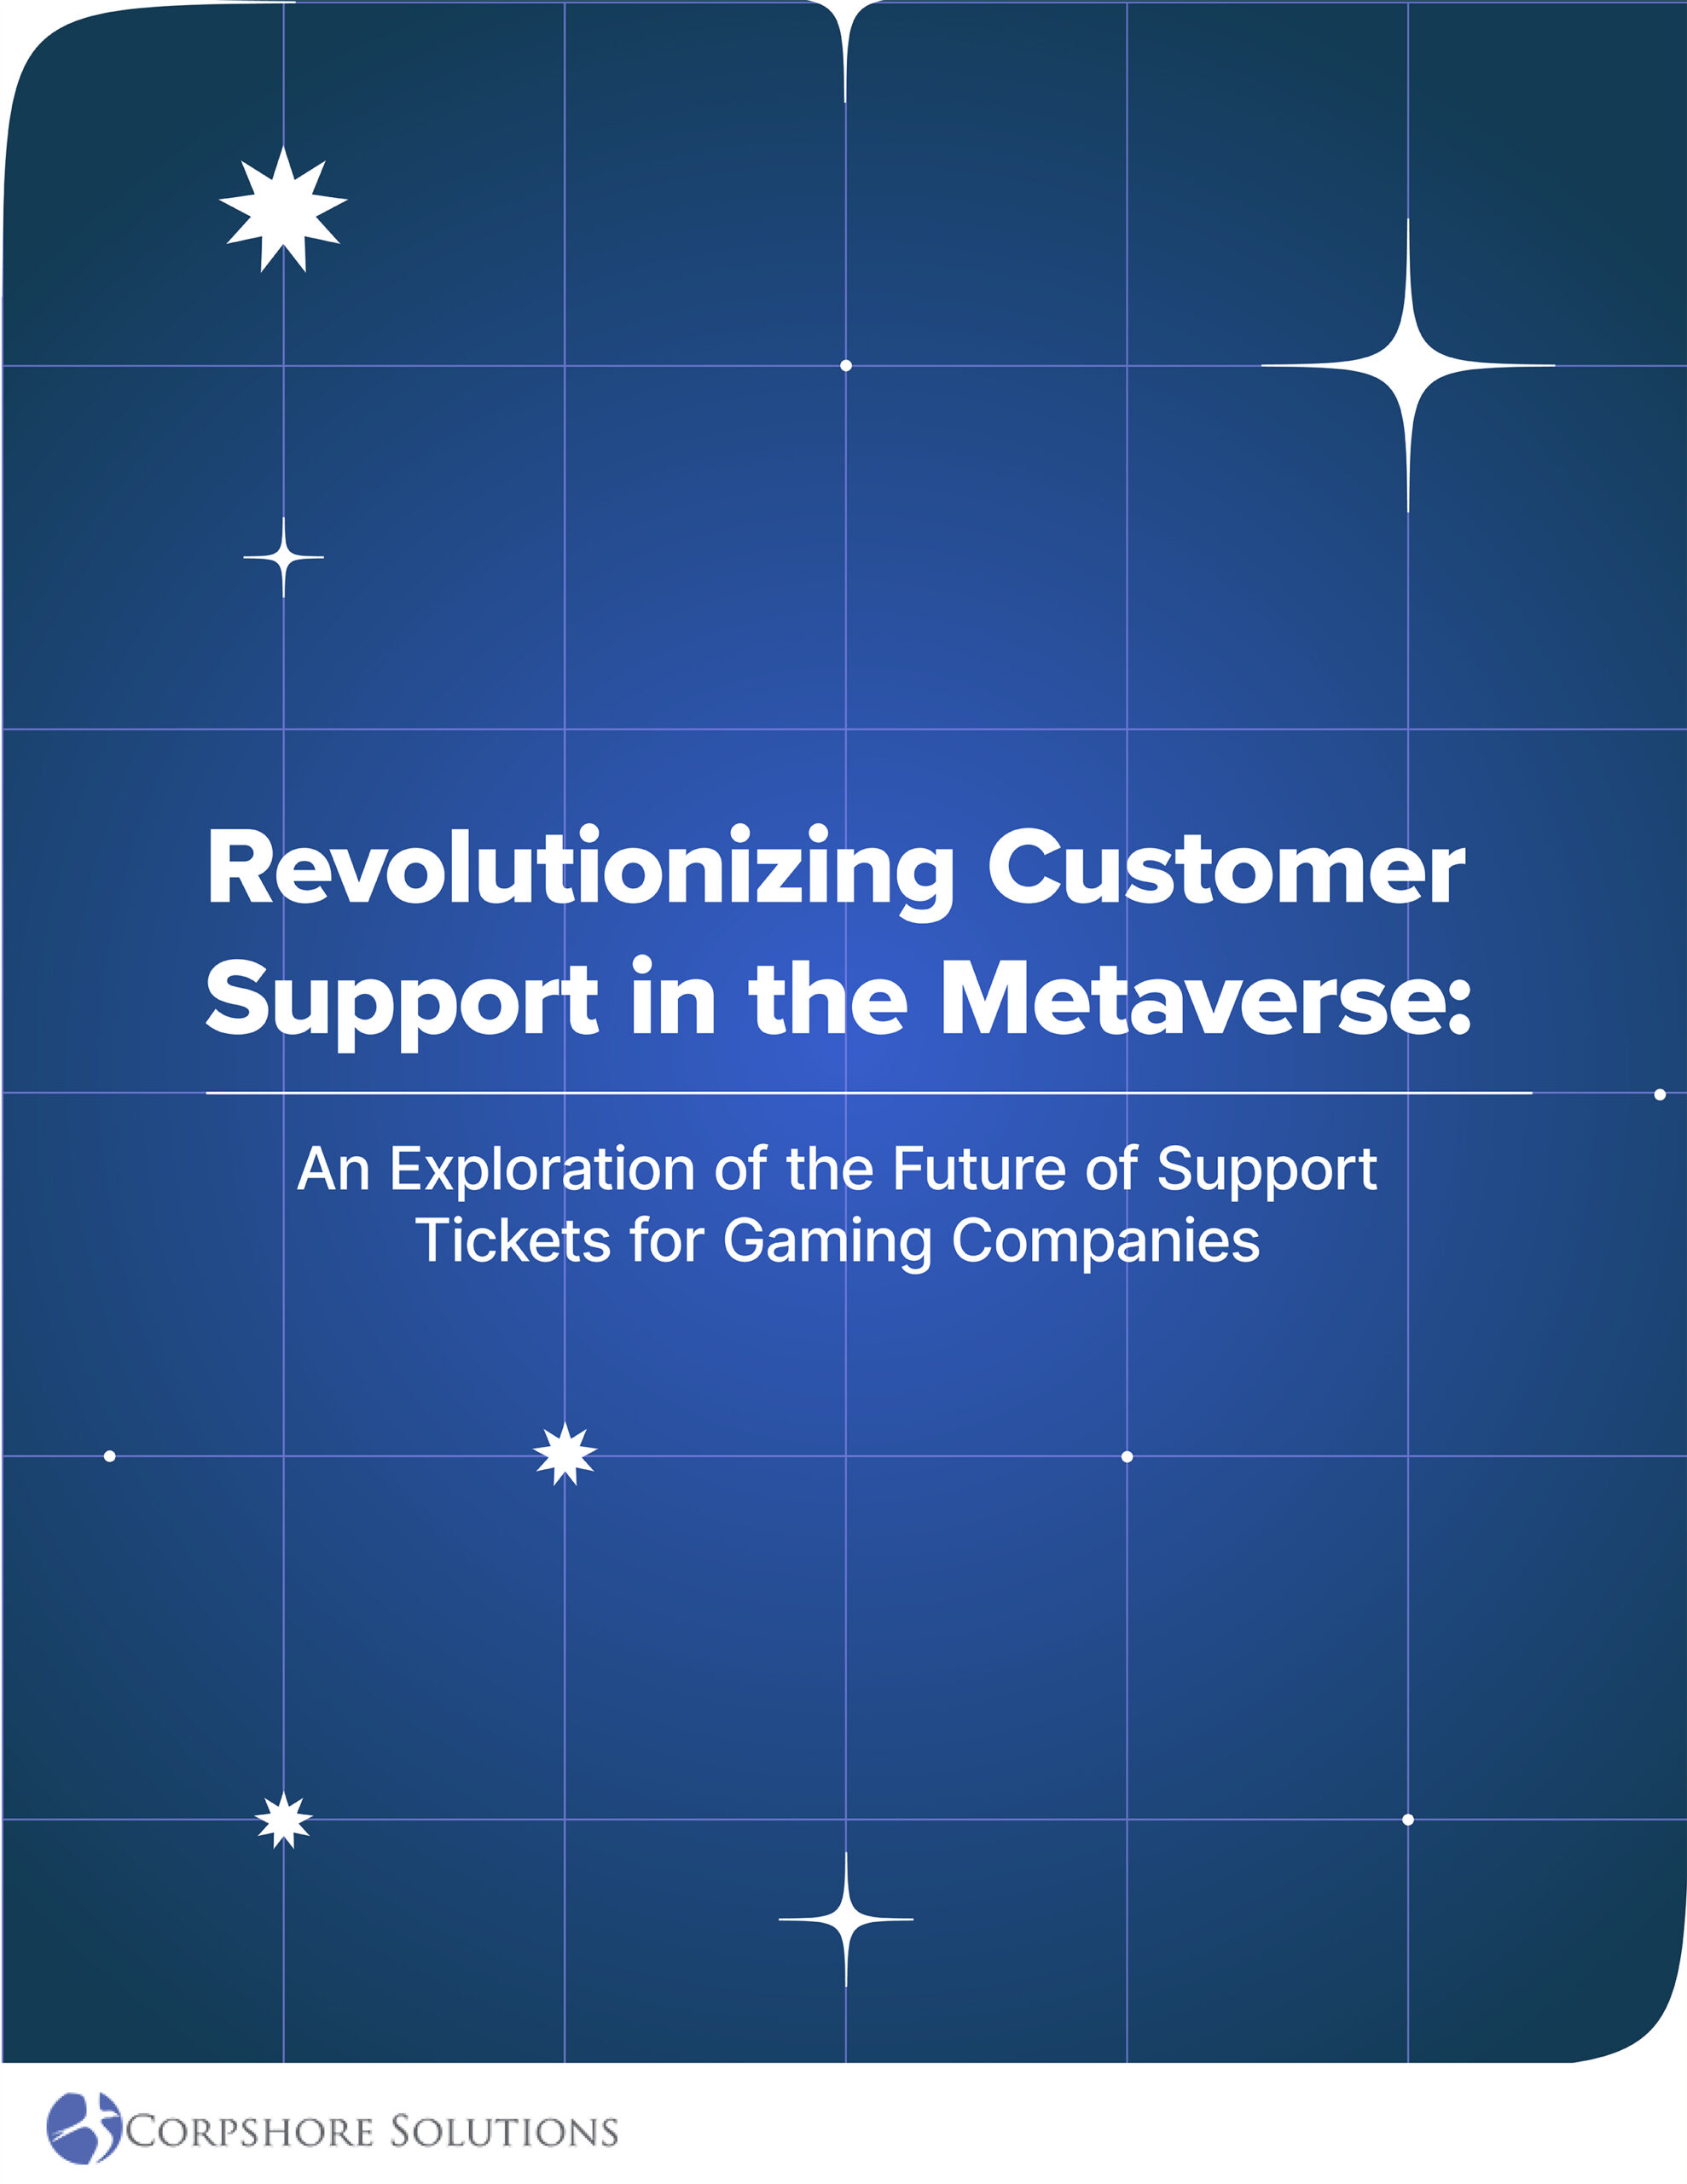 Revolutionizing Customer Support in the Metaverse: An Exploration of the Future of Support Tickets for Gaming Companies